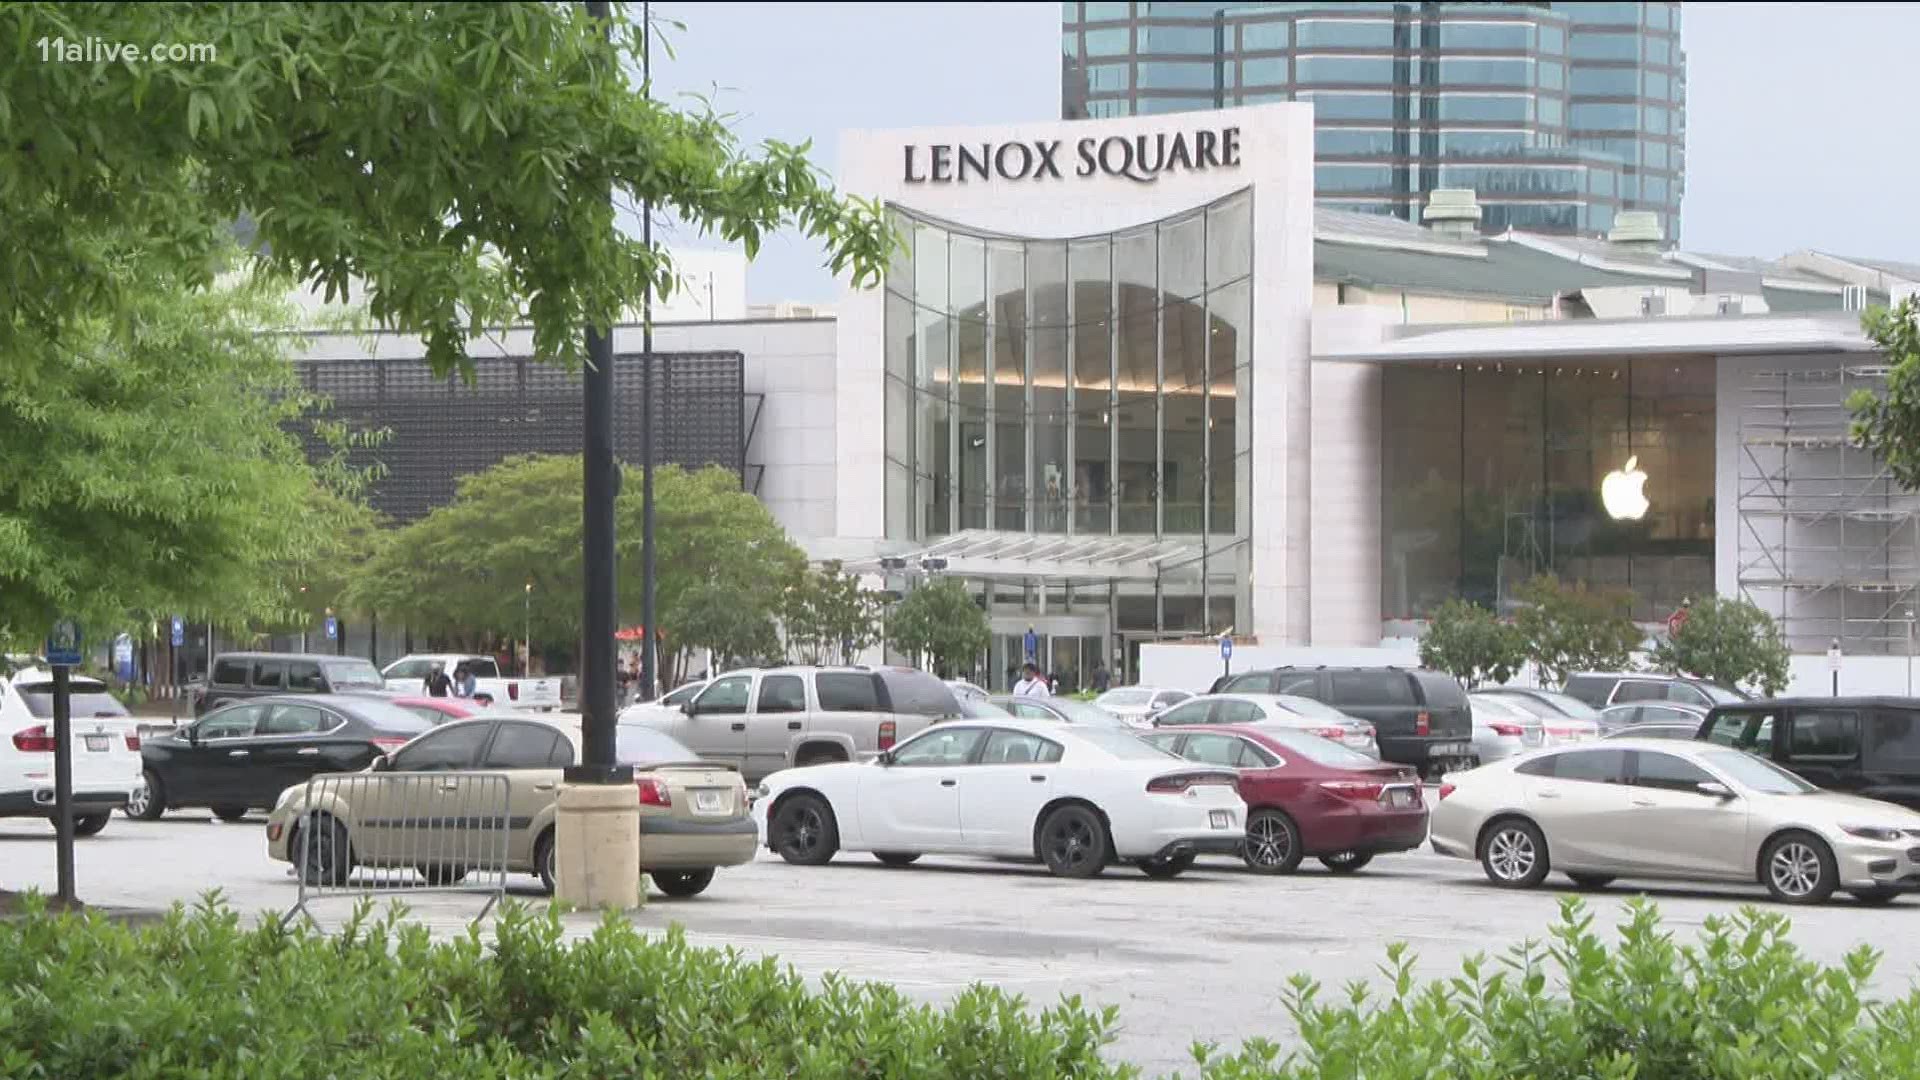 The assault Tuesday afternoon is again focusing attention on issues of security and safety at one of Metro Atlanta’s most popular shopping malls.